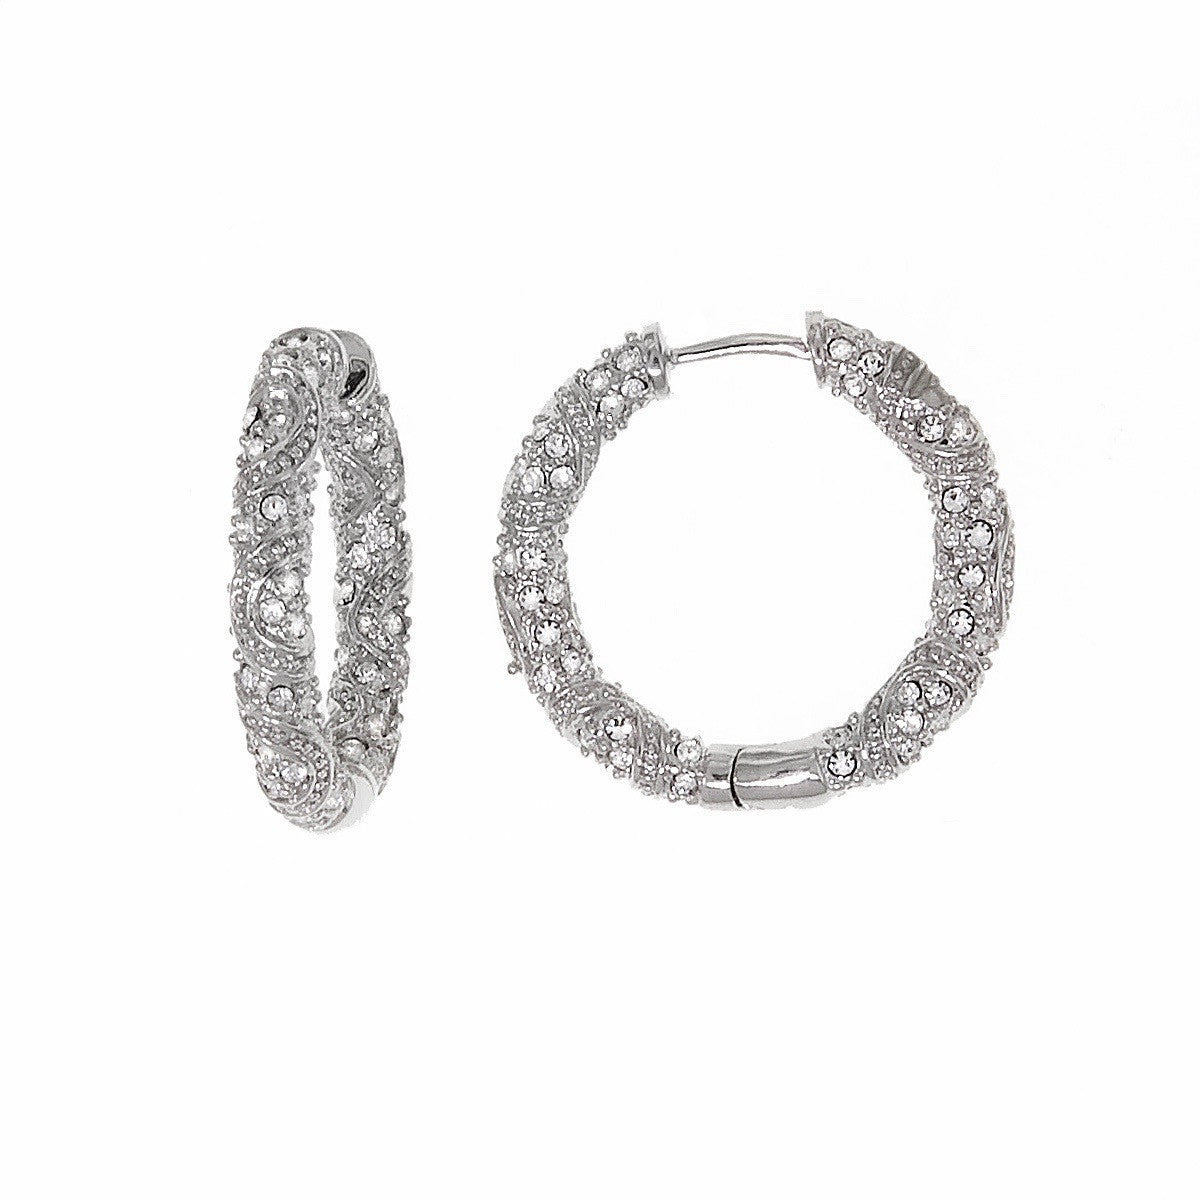 Swarovski Crystal Antique Style Small Hoop Earring by Bobby Schandra